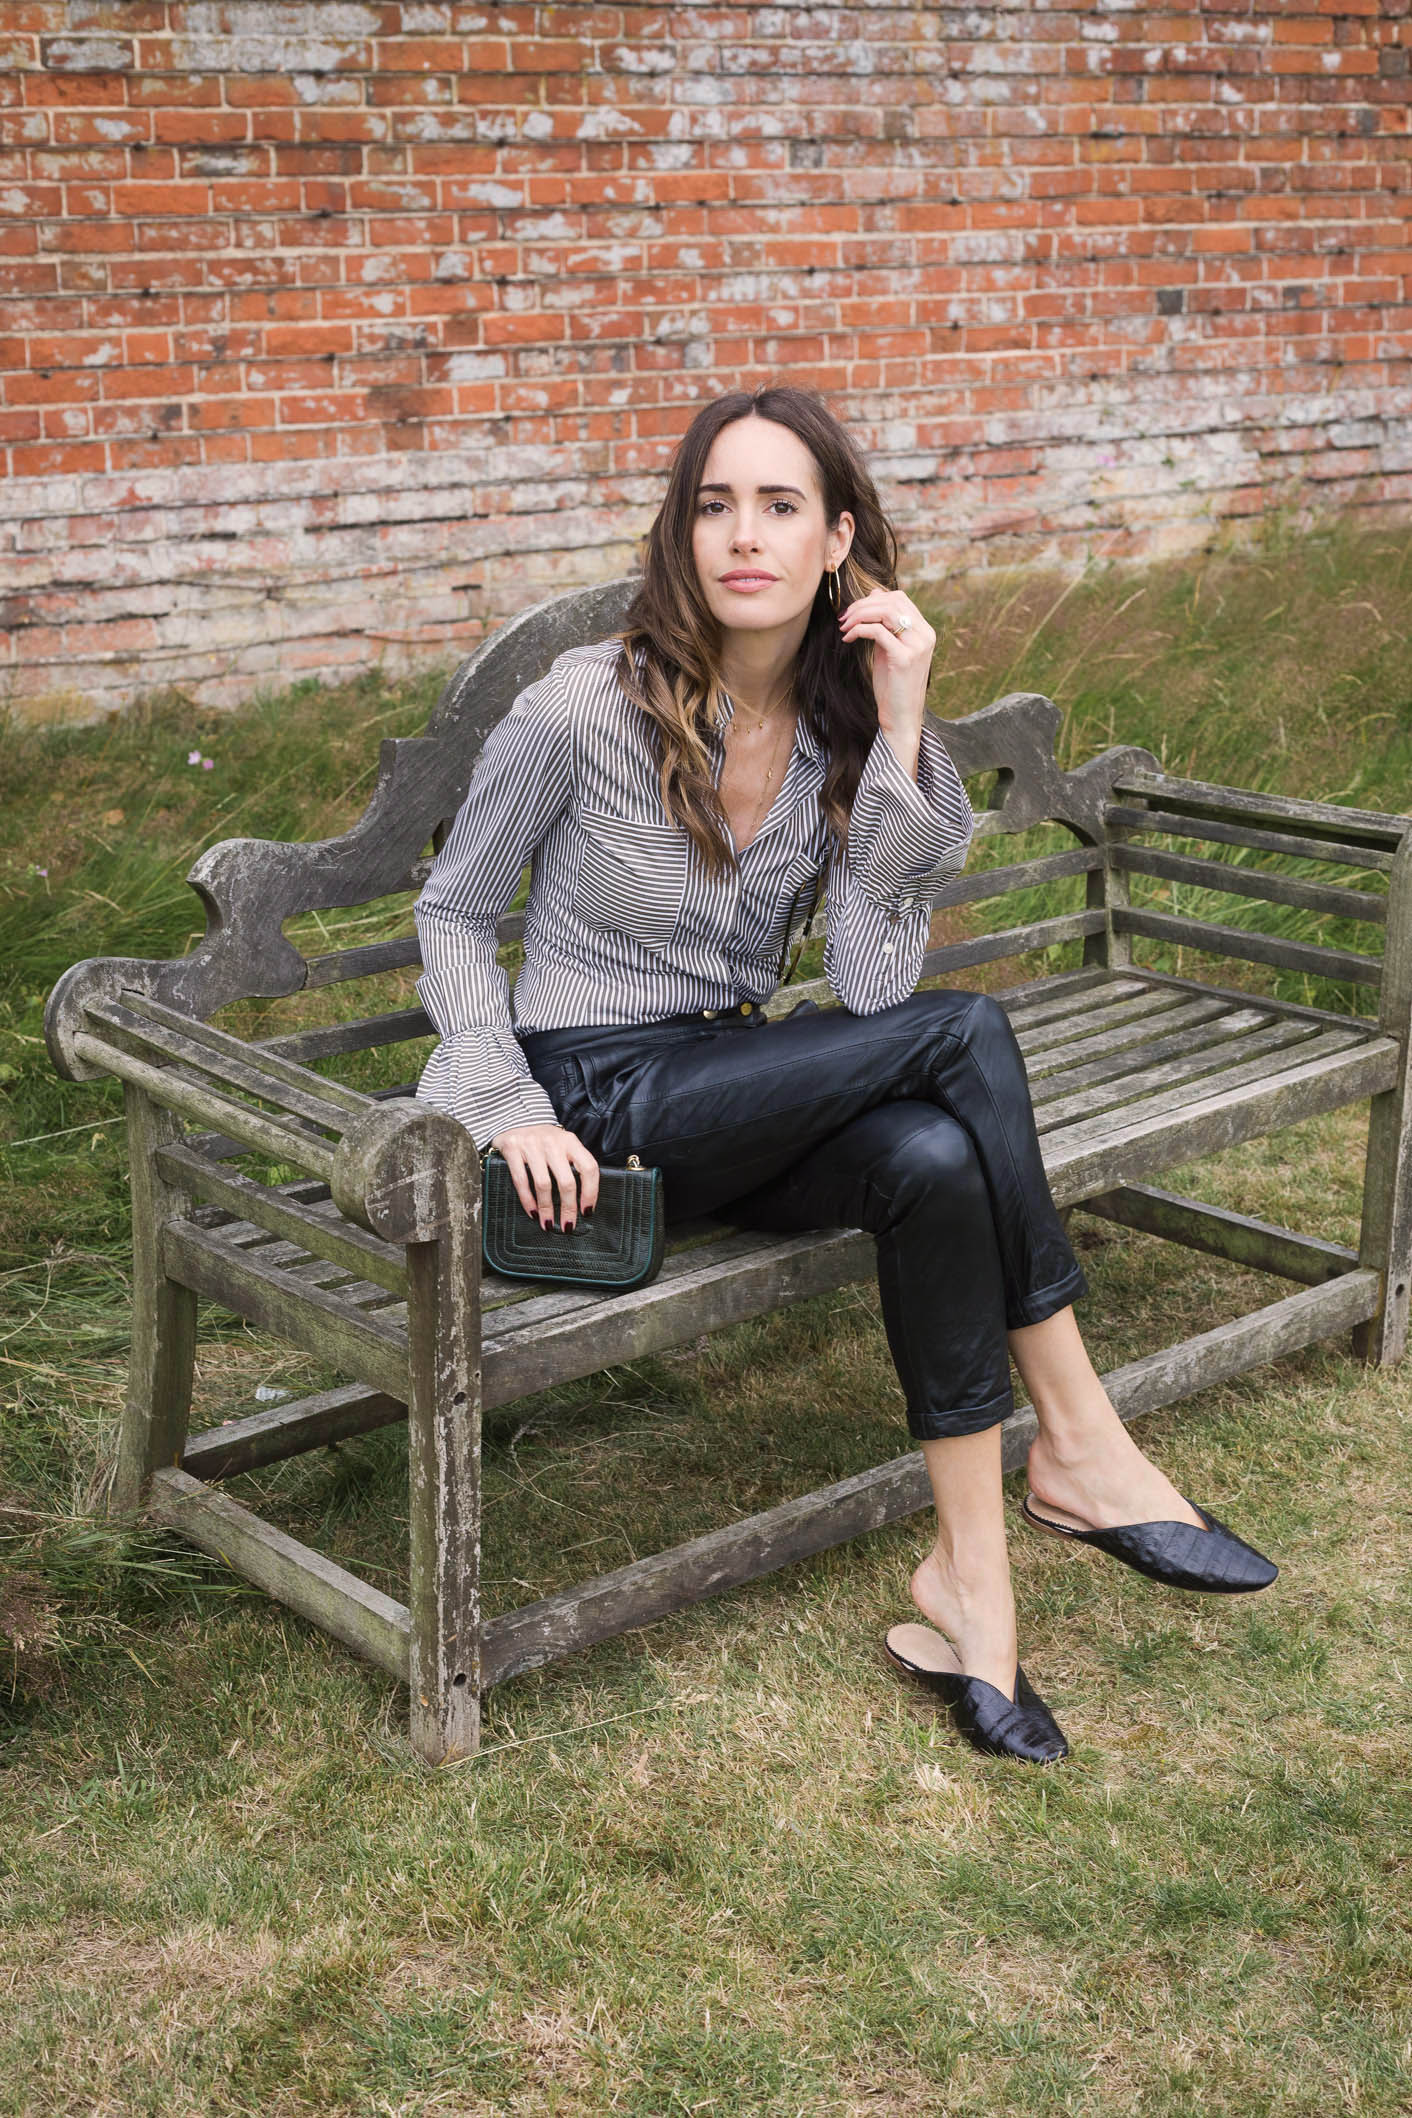 Louise Roe showcases a chic work outfit featuring leather pants and a striped blouse